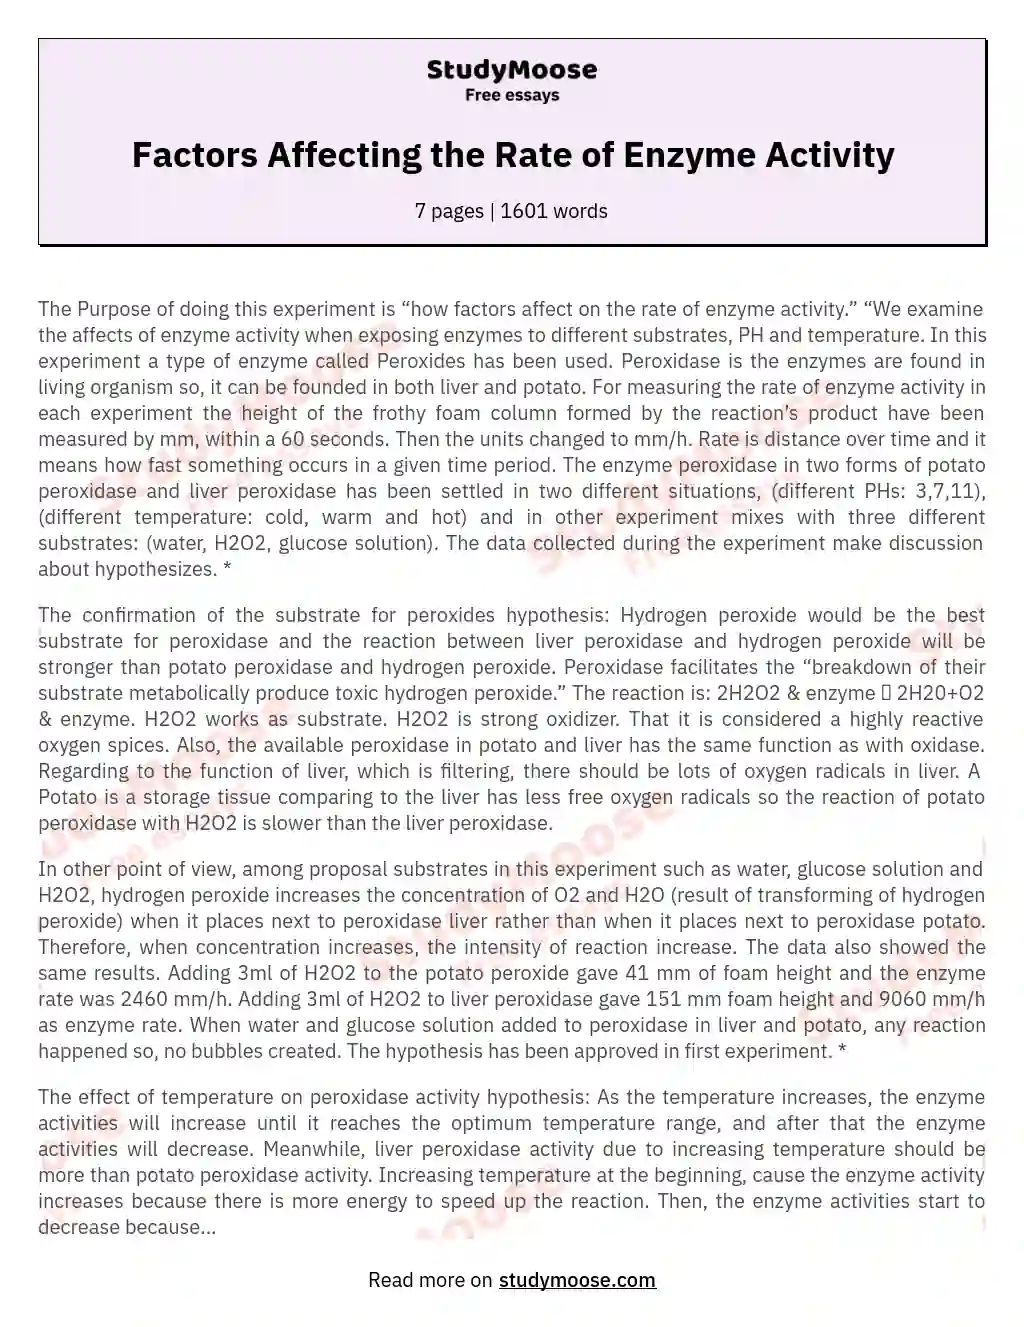 Factors Affecting the Rate of Enzyme Activity